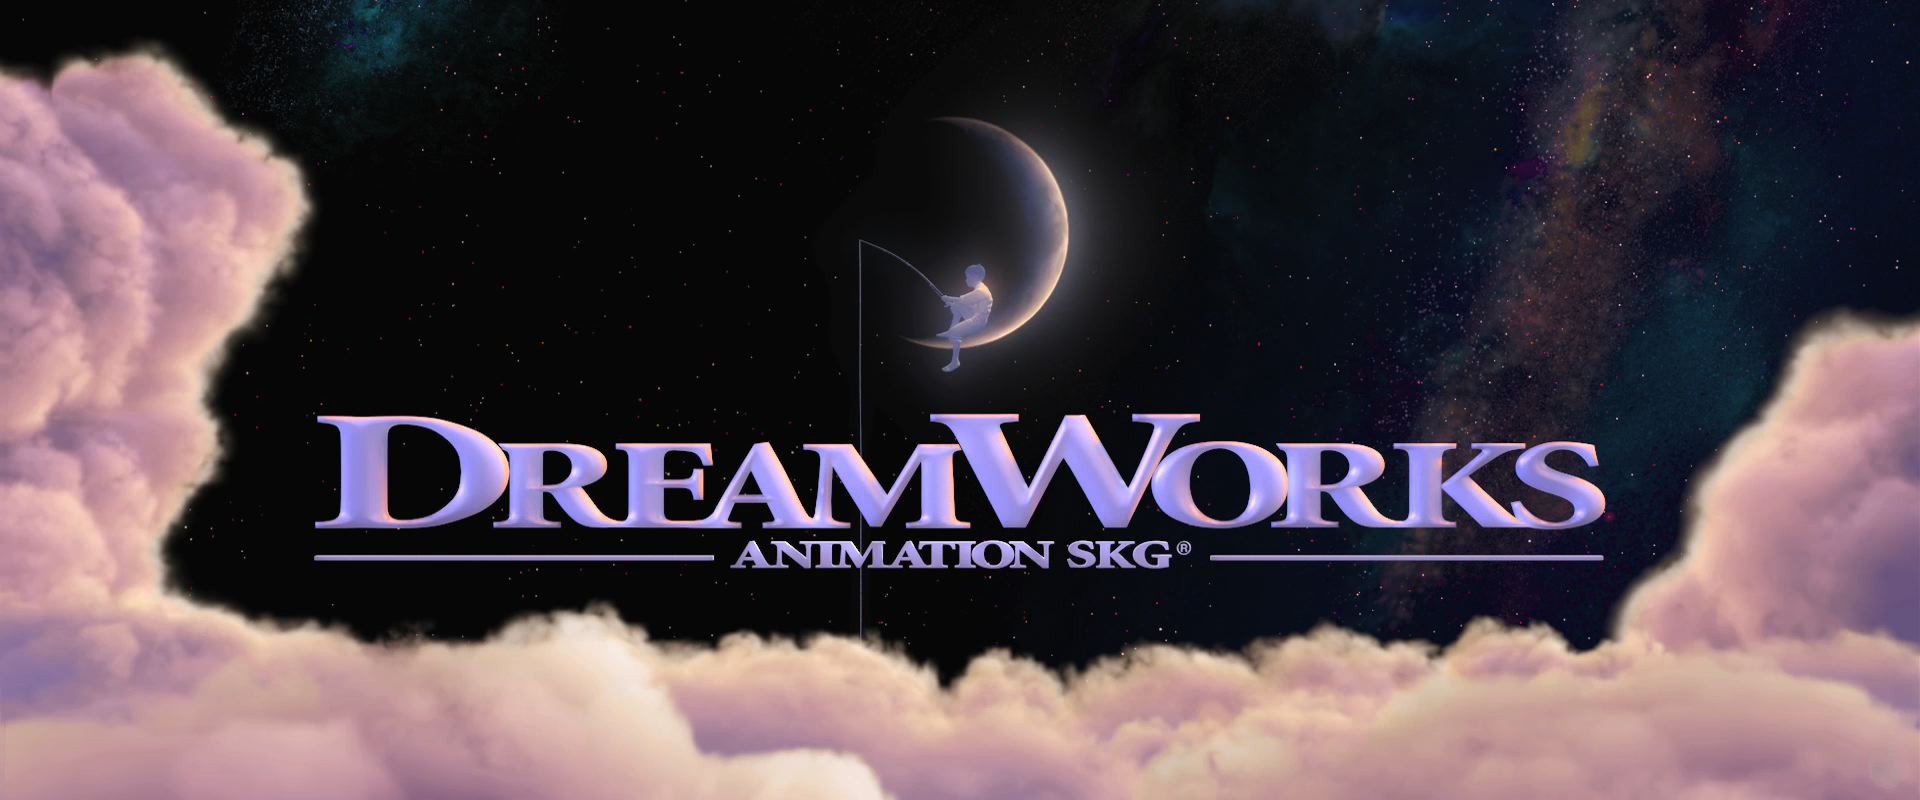 Dreamworks Studio Logo Showing Crescent Moon In A Night Sky And Clouds